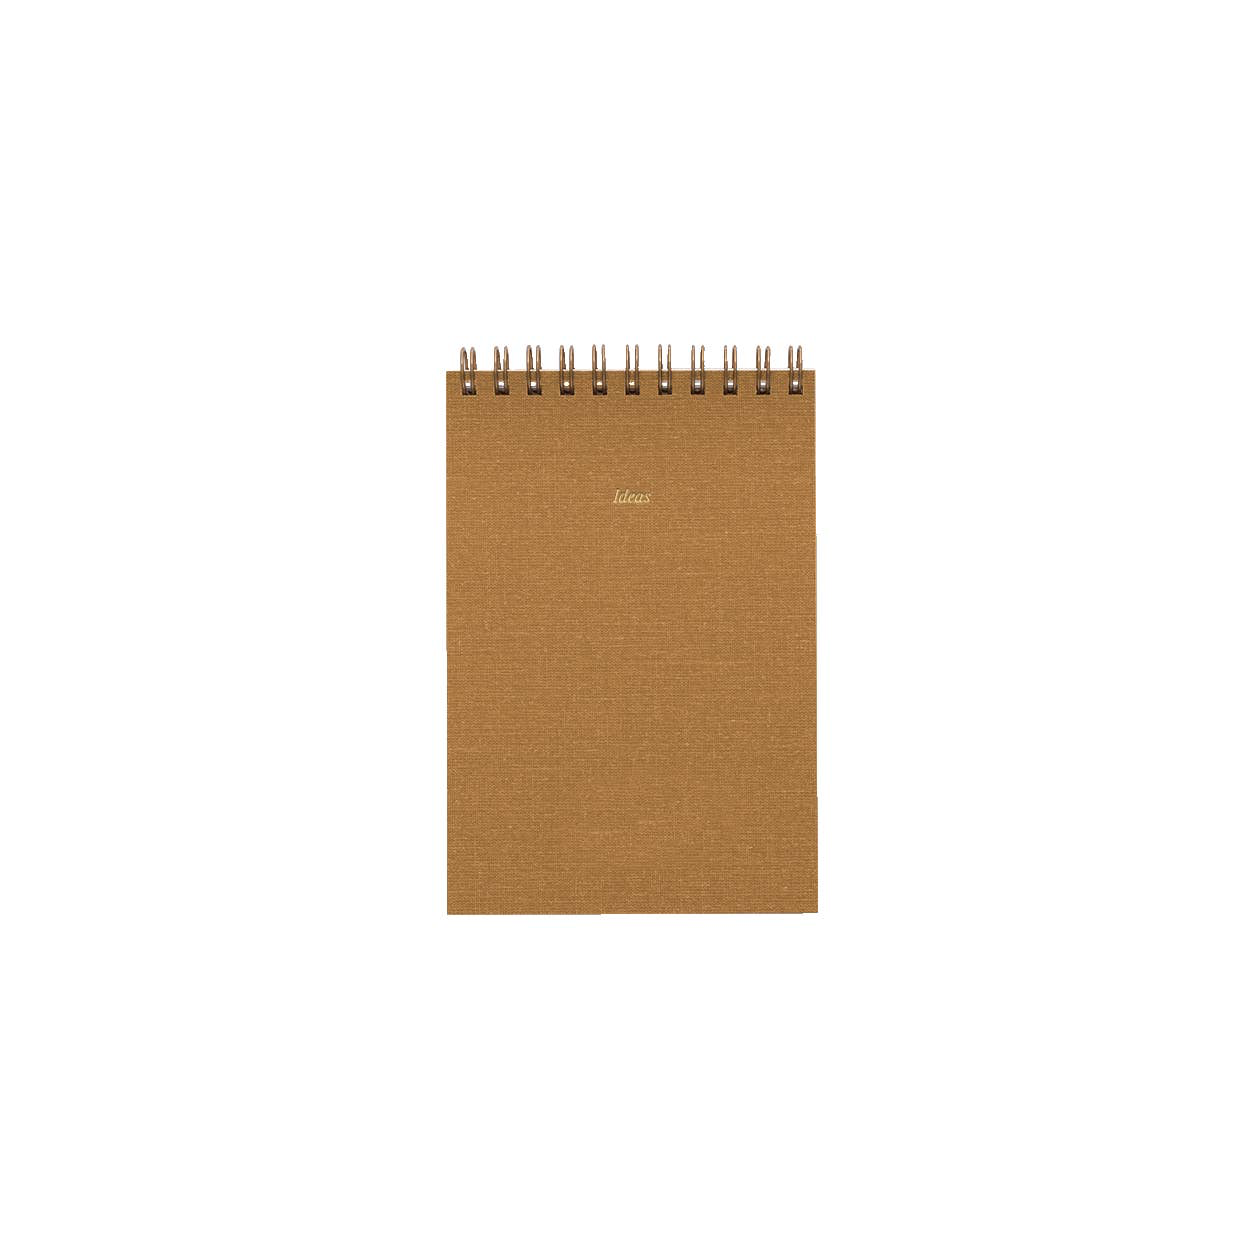 The Appointed Ideas Notepad